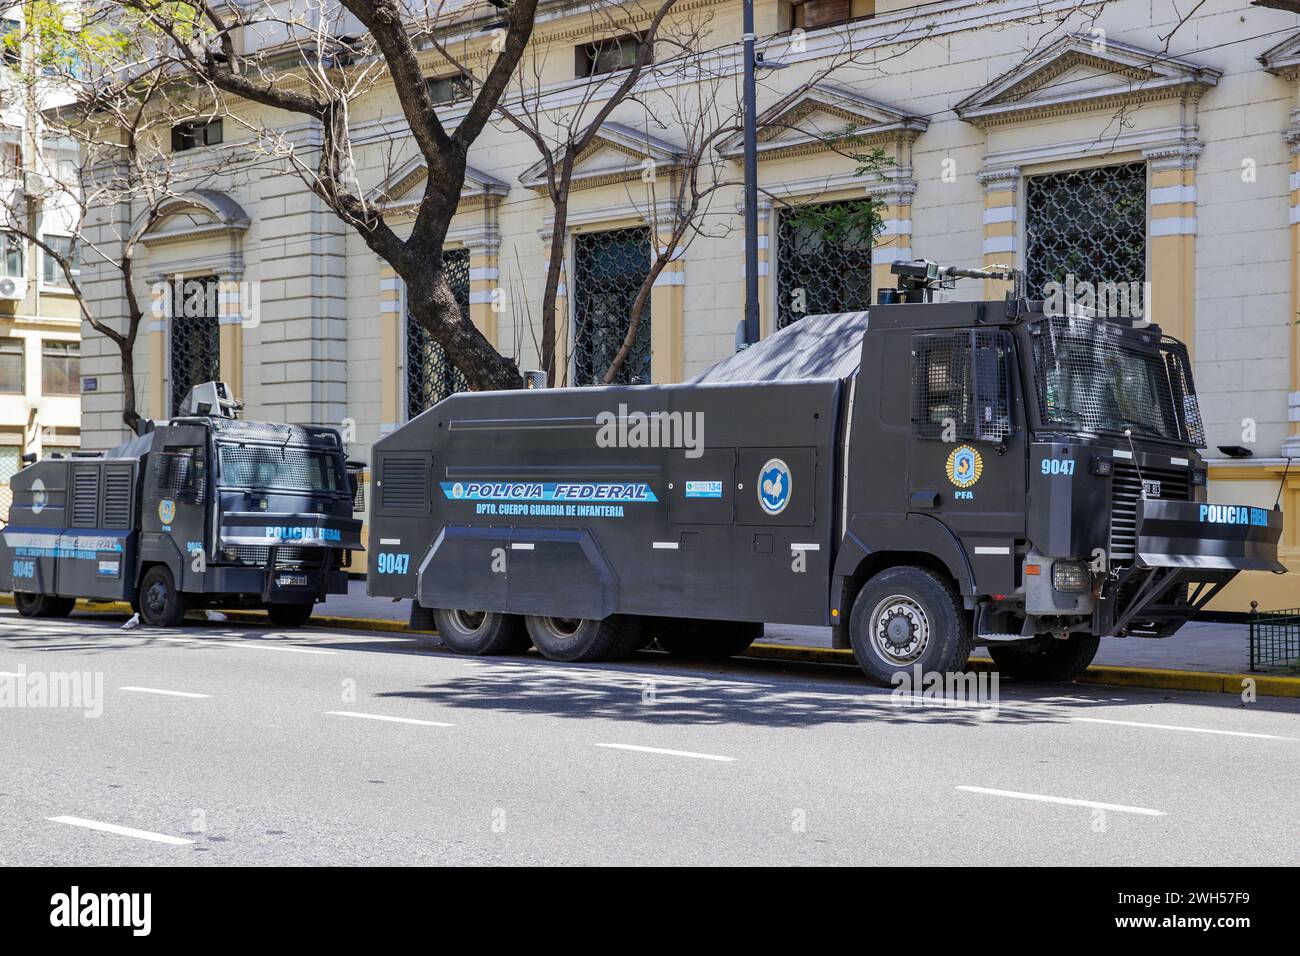 Riot control water cannon outside police headquarters, Buenos Aires, Argentina, Tuesday, November 14, 2023. Photo: David Rowland / One-Image.com Stock Photo